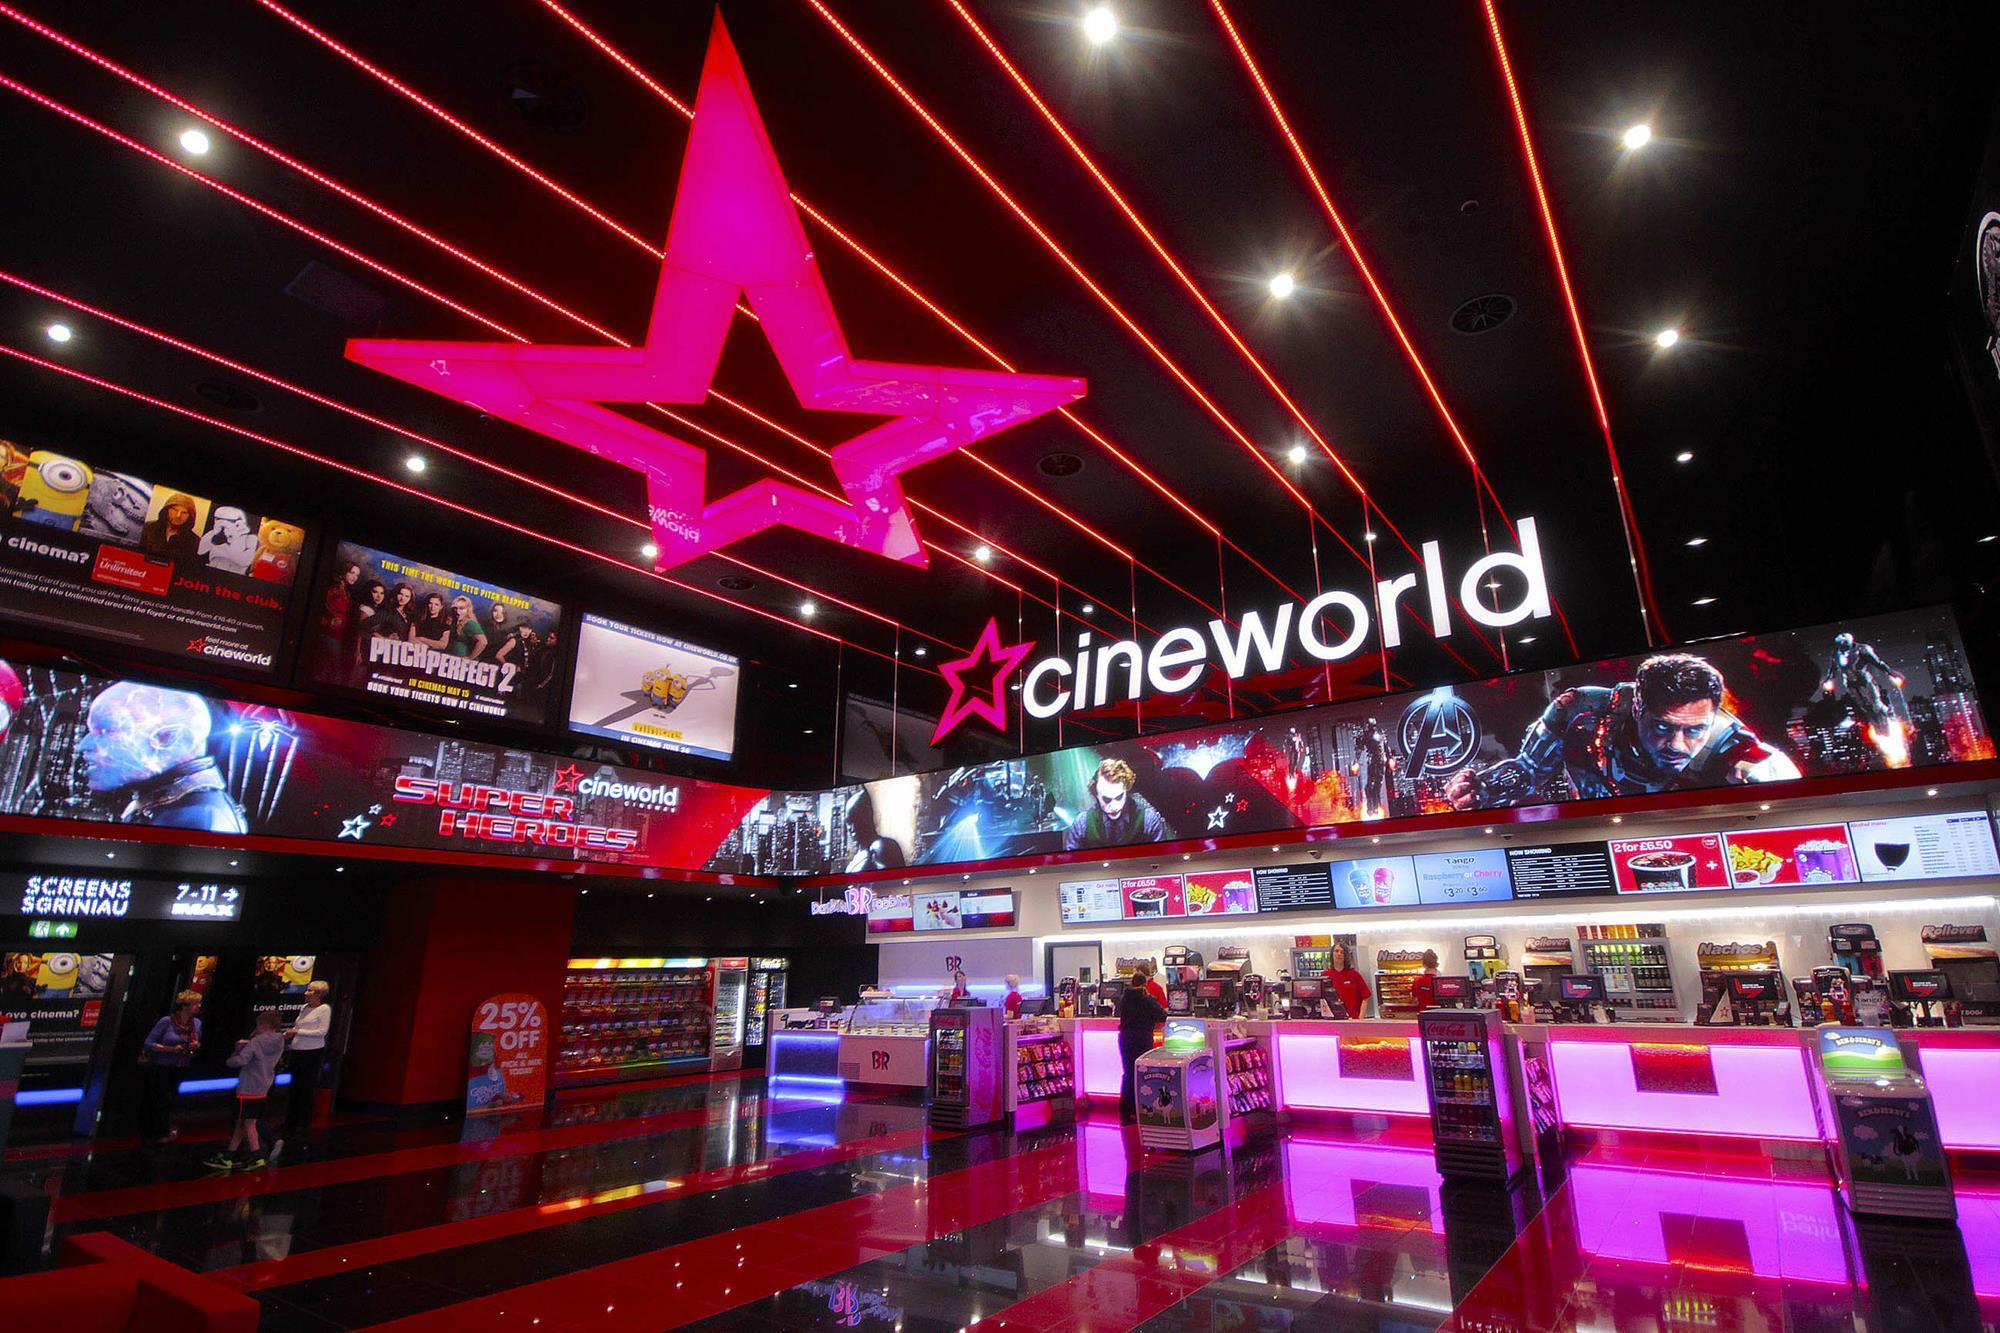 Cineworld says it will not show films that 'fail to respect ...